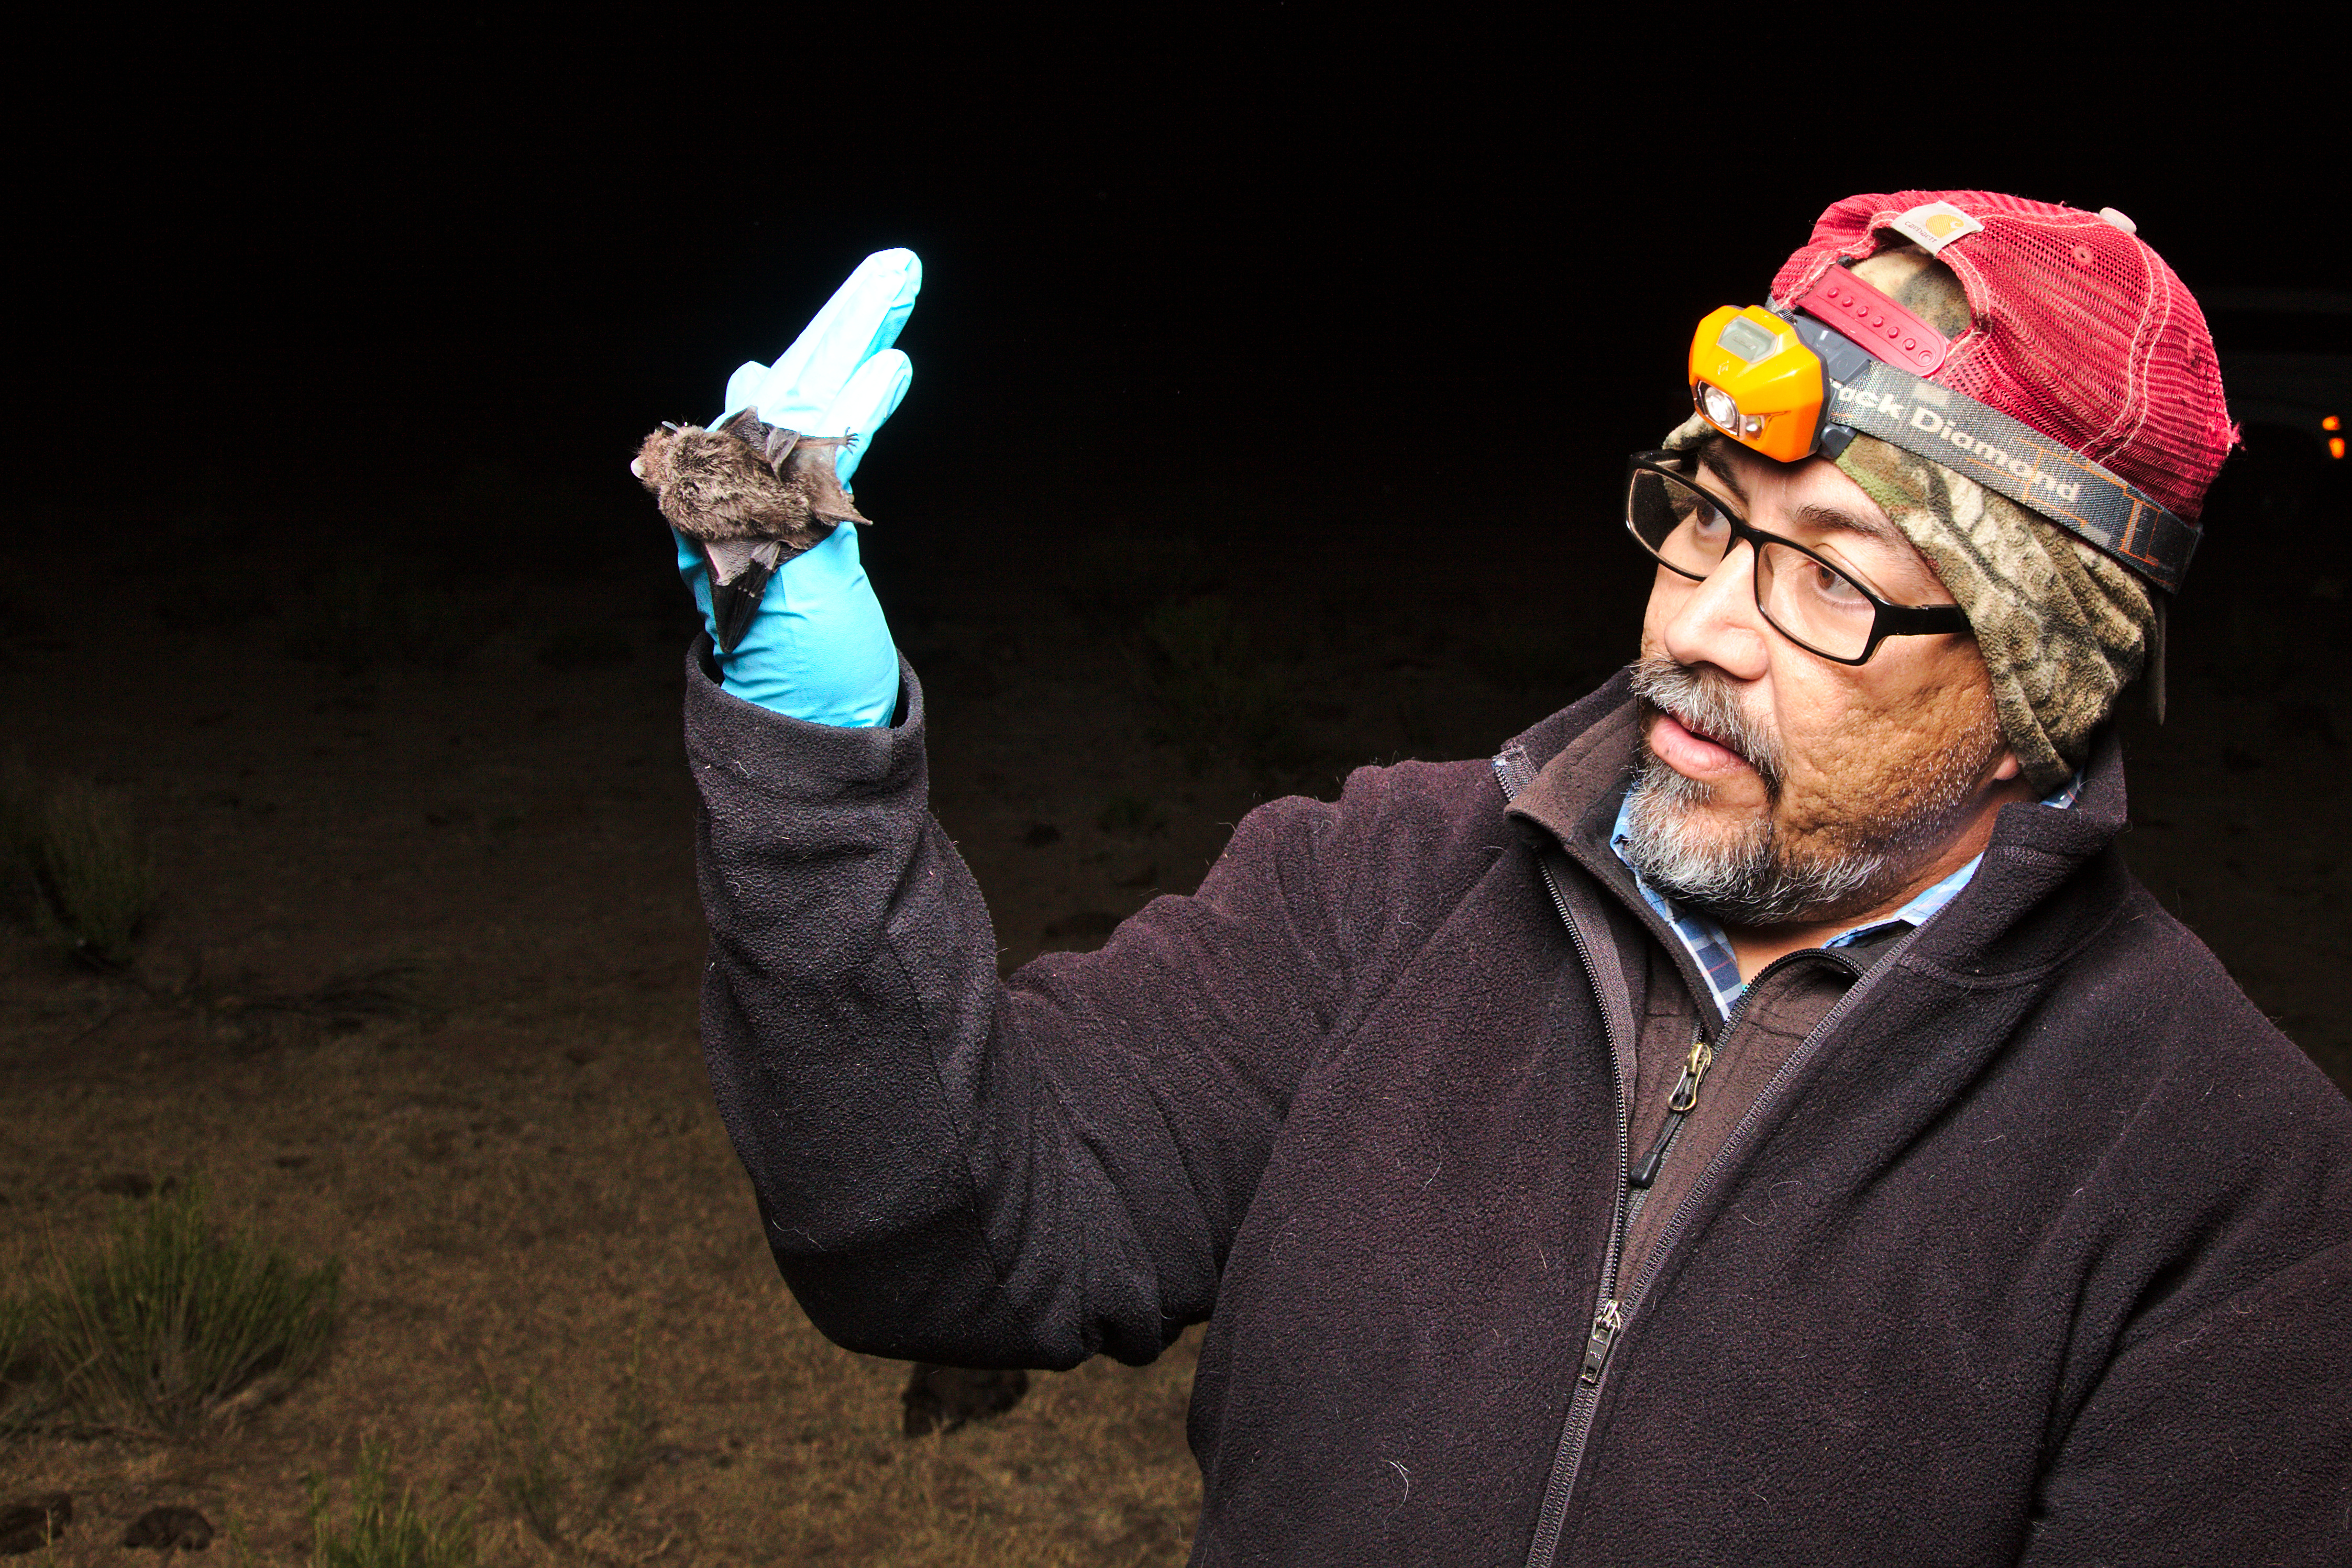 Ernie releasing the Lasionycteris noctivagans (silver-haired bat